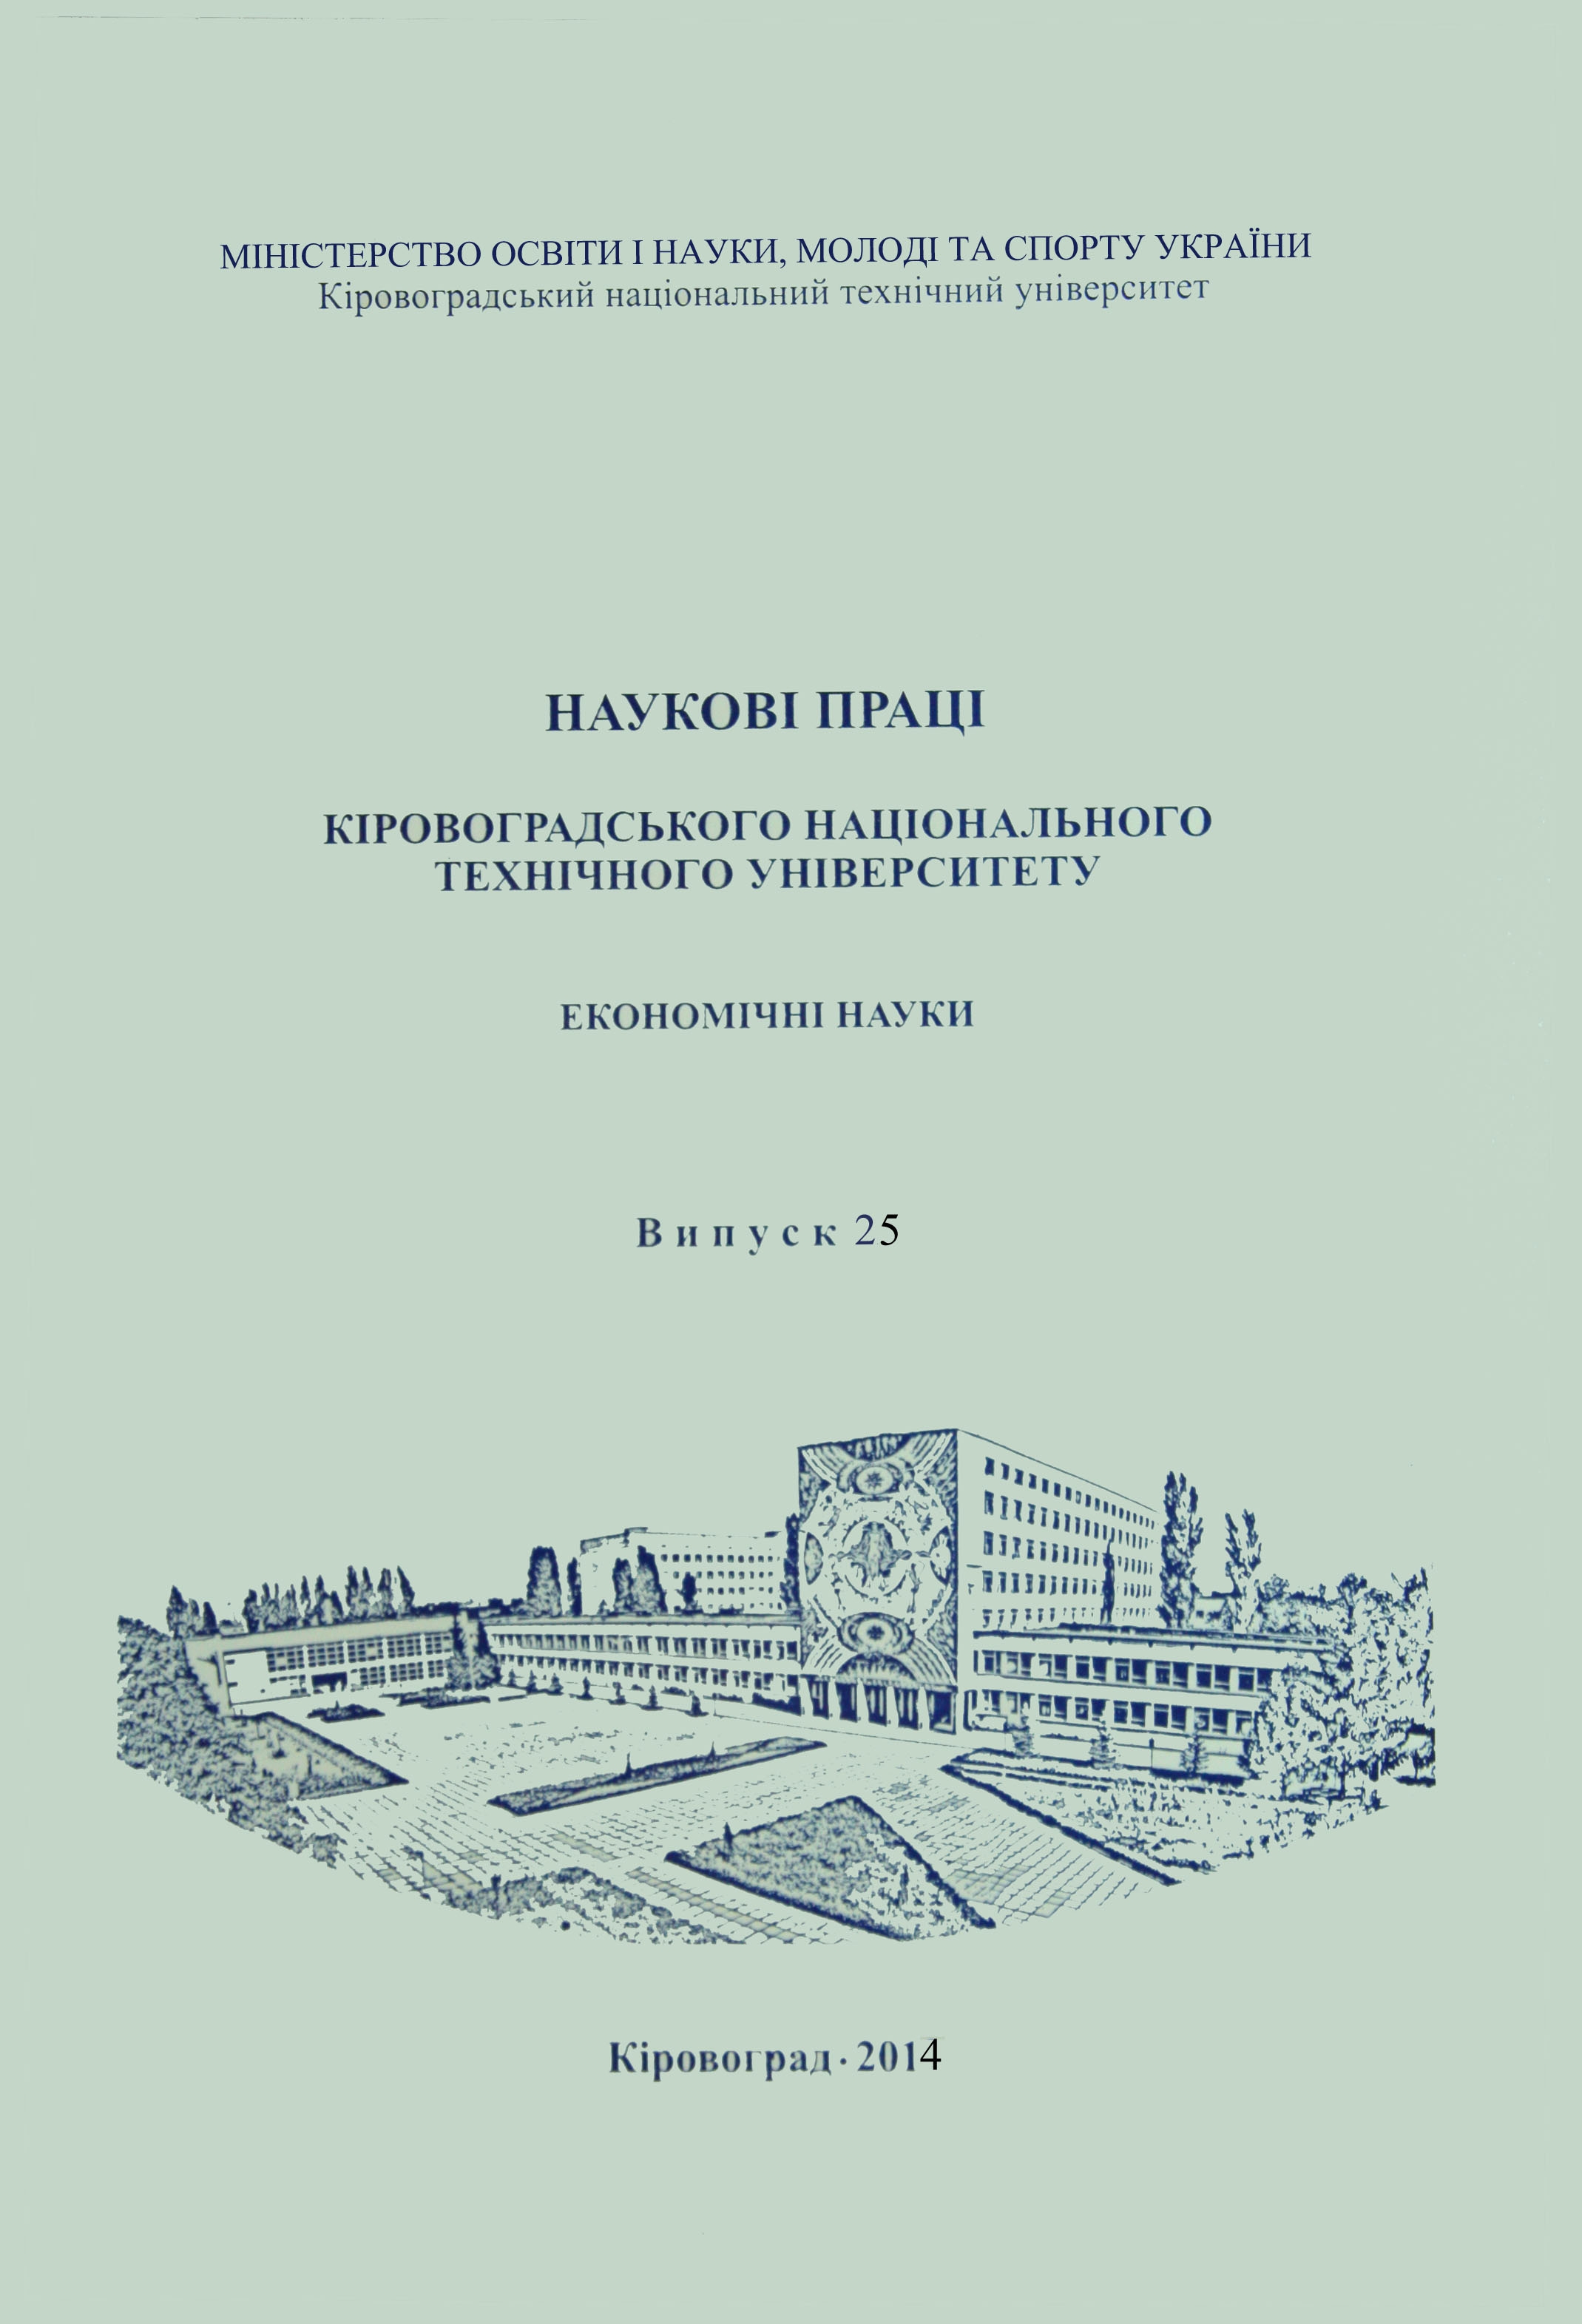 The history of the formation of commodity market infrastructure in Ukraine in XVIII - XX centuries